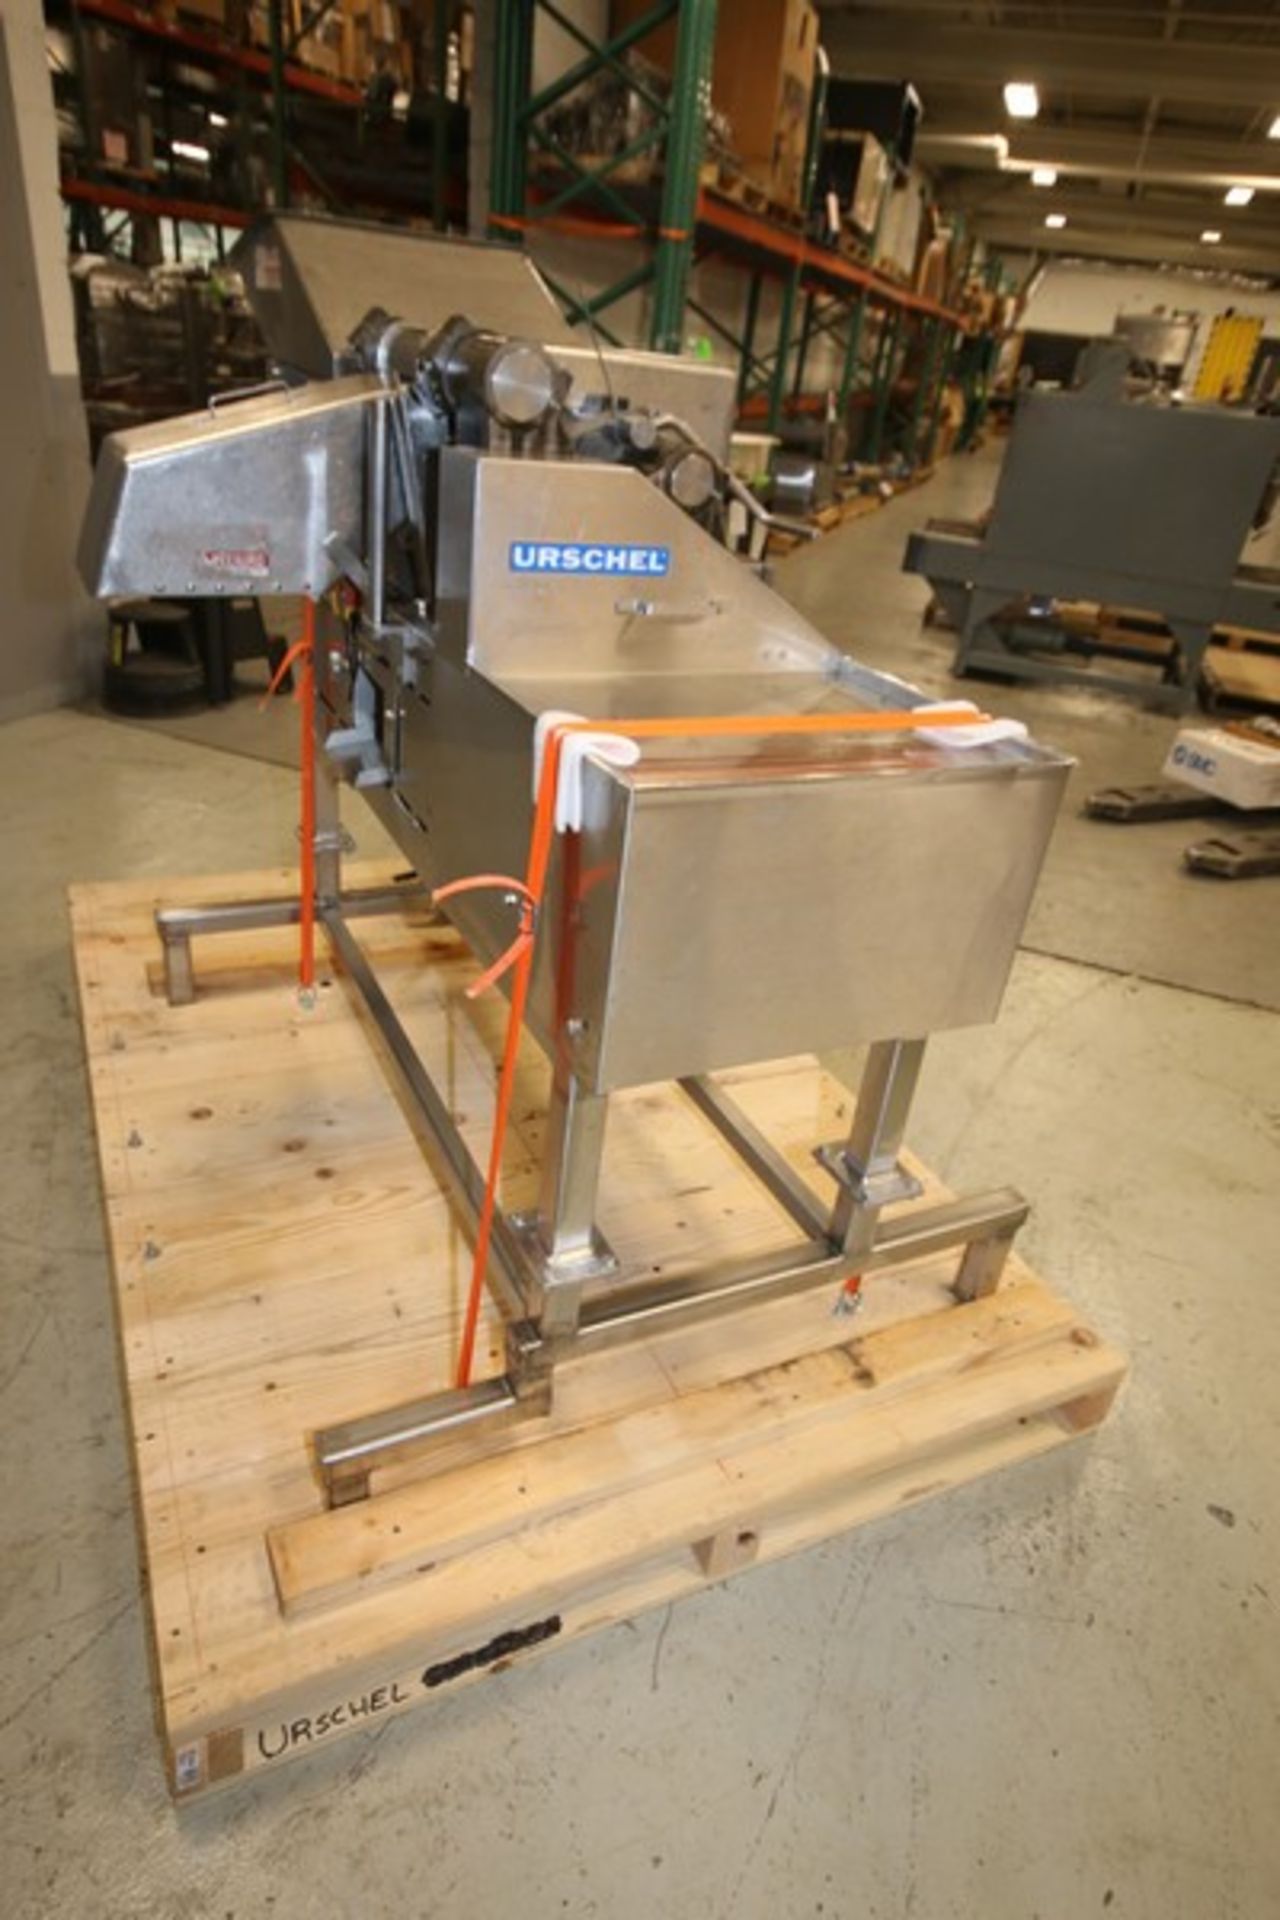 Urschel S/S Slicer / Dicer, Model G-A, SN 4373, with Controls, Includes Casters & (4) Blade Sets - Image 5 of 11